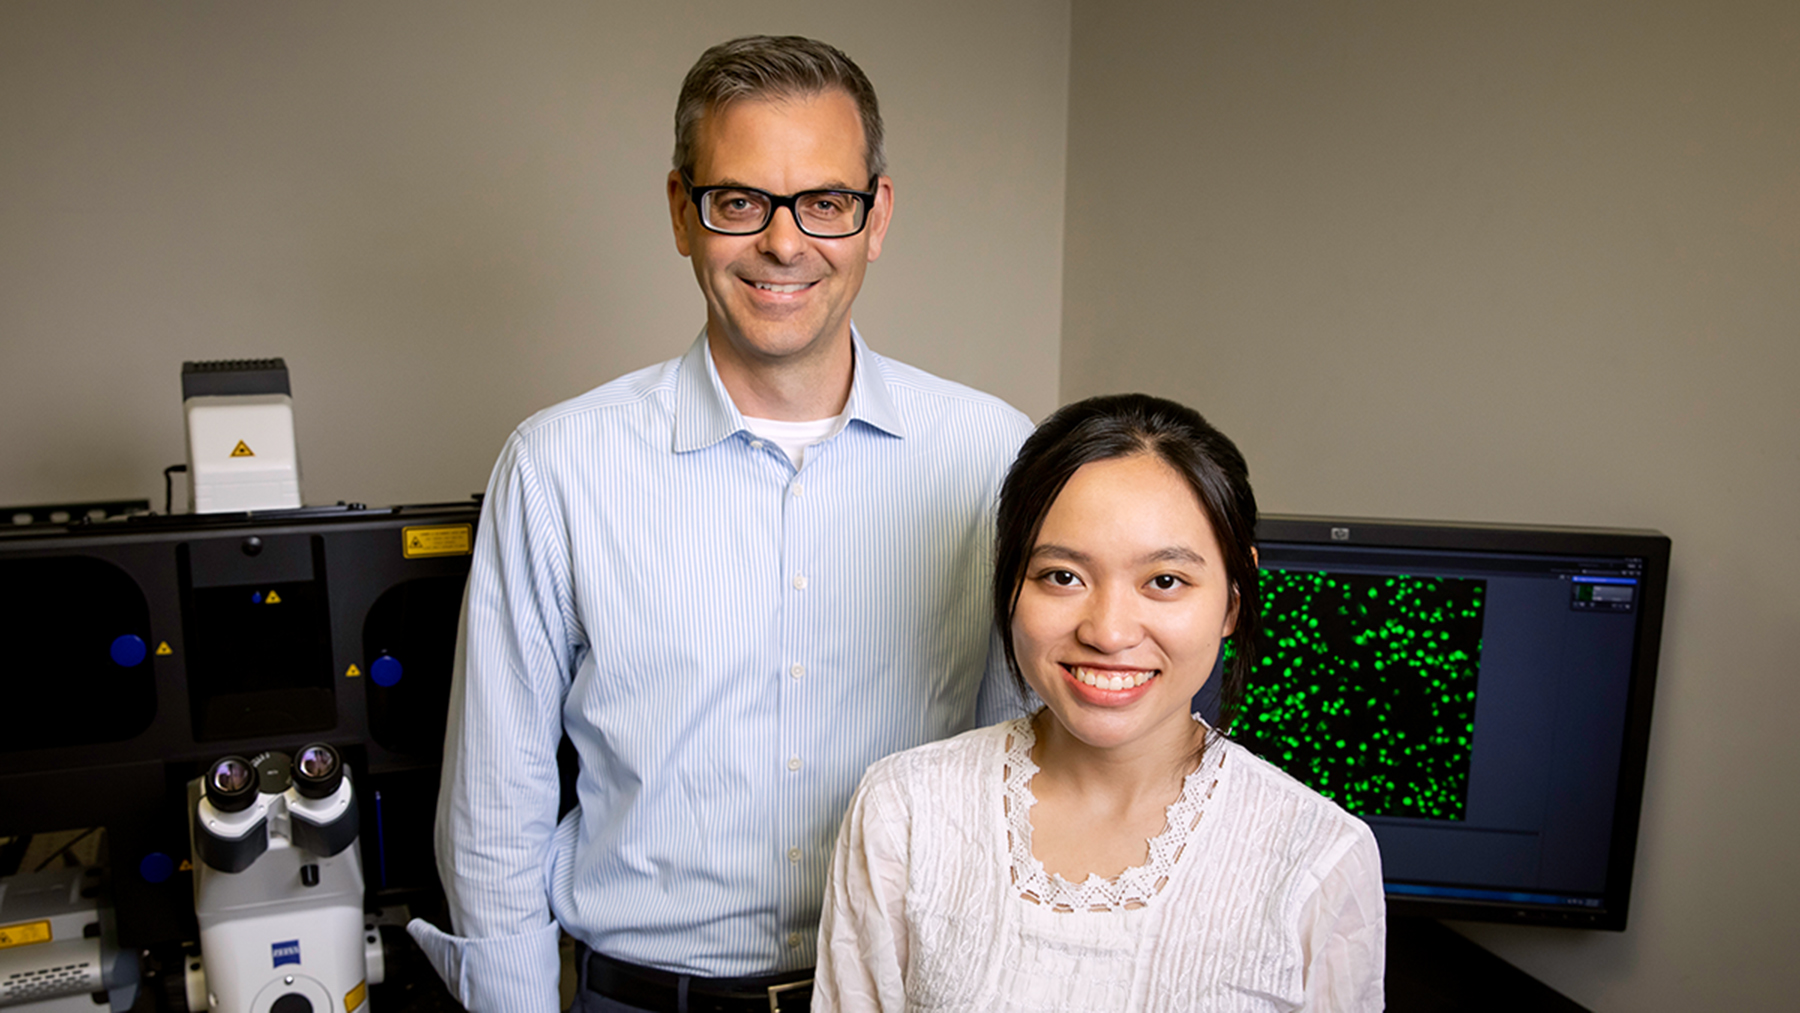 University of Illinois chemistry professor Martin D. Burke and graduate student Stella Ekaputri were part of a team that found a small molecule, hinokitiol, ferries iron out of liver cells lacking the protein that normally does the job and restores hemoglobin and red blood cell production. Photo by Michelle Hassel